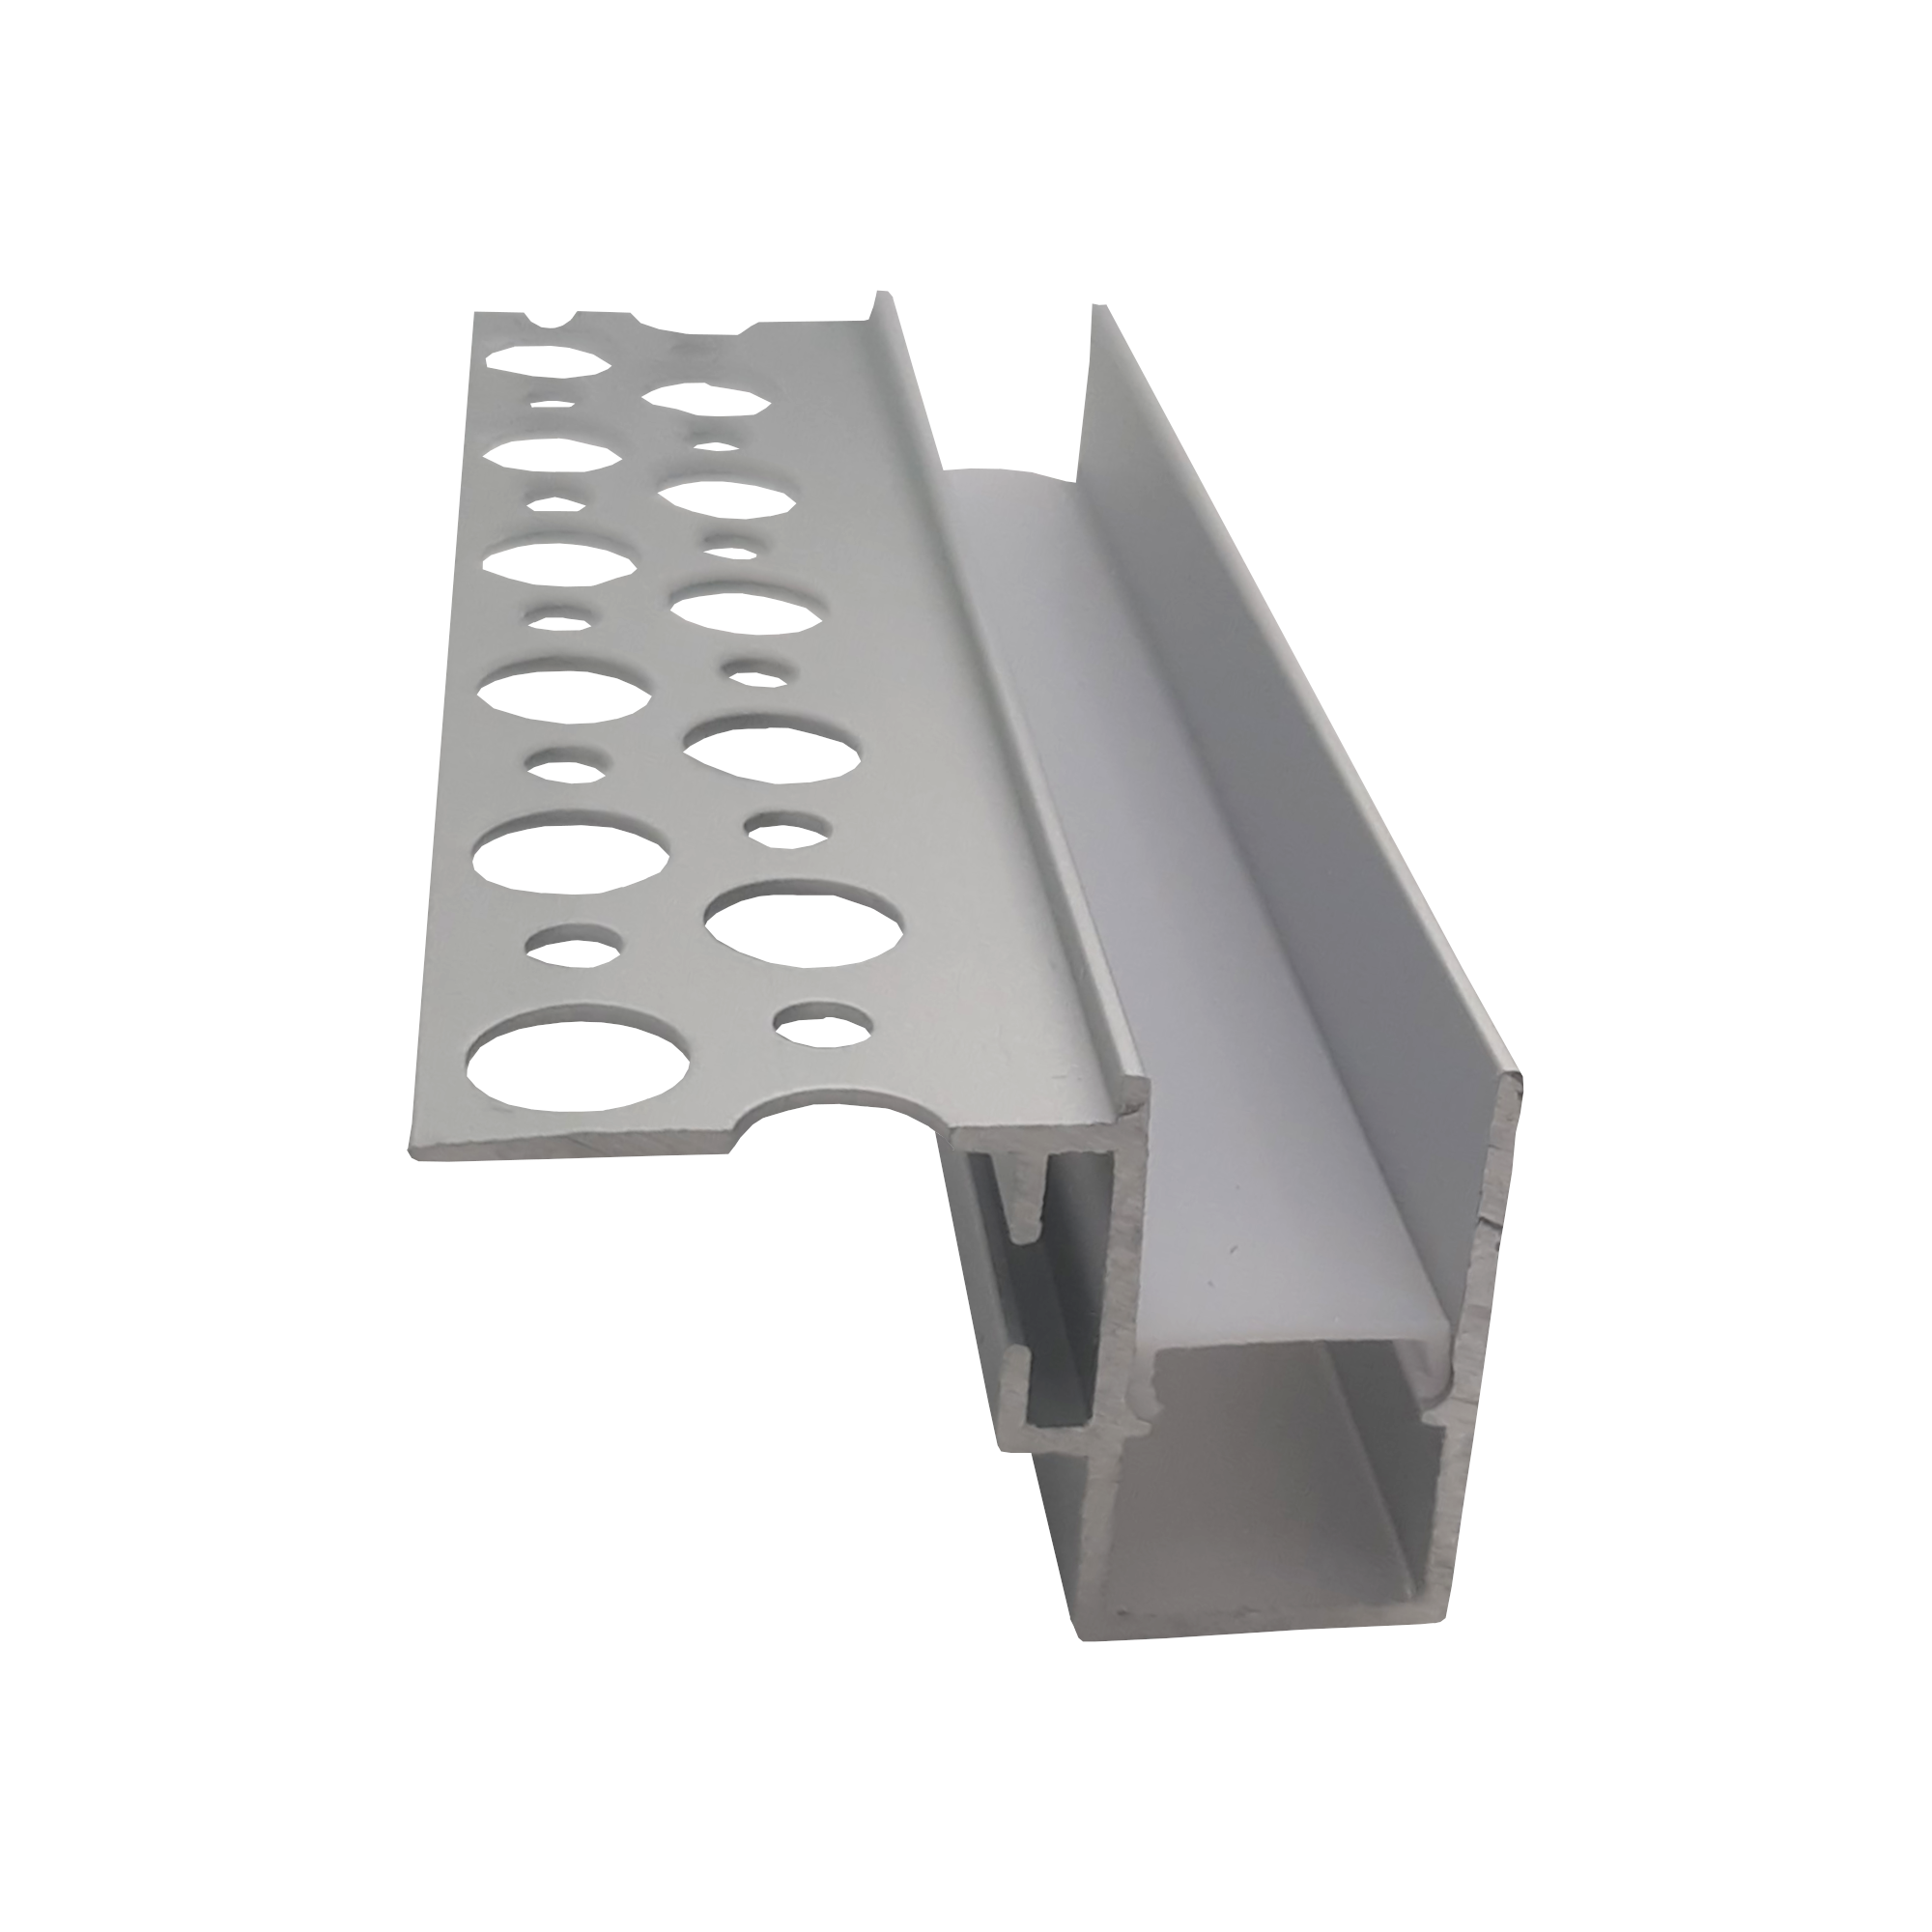 RSA-49 Recessed Plaster Extrusion 1 Wing